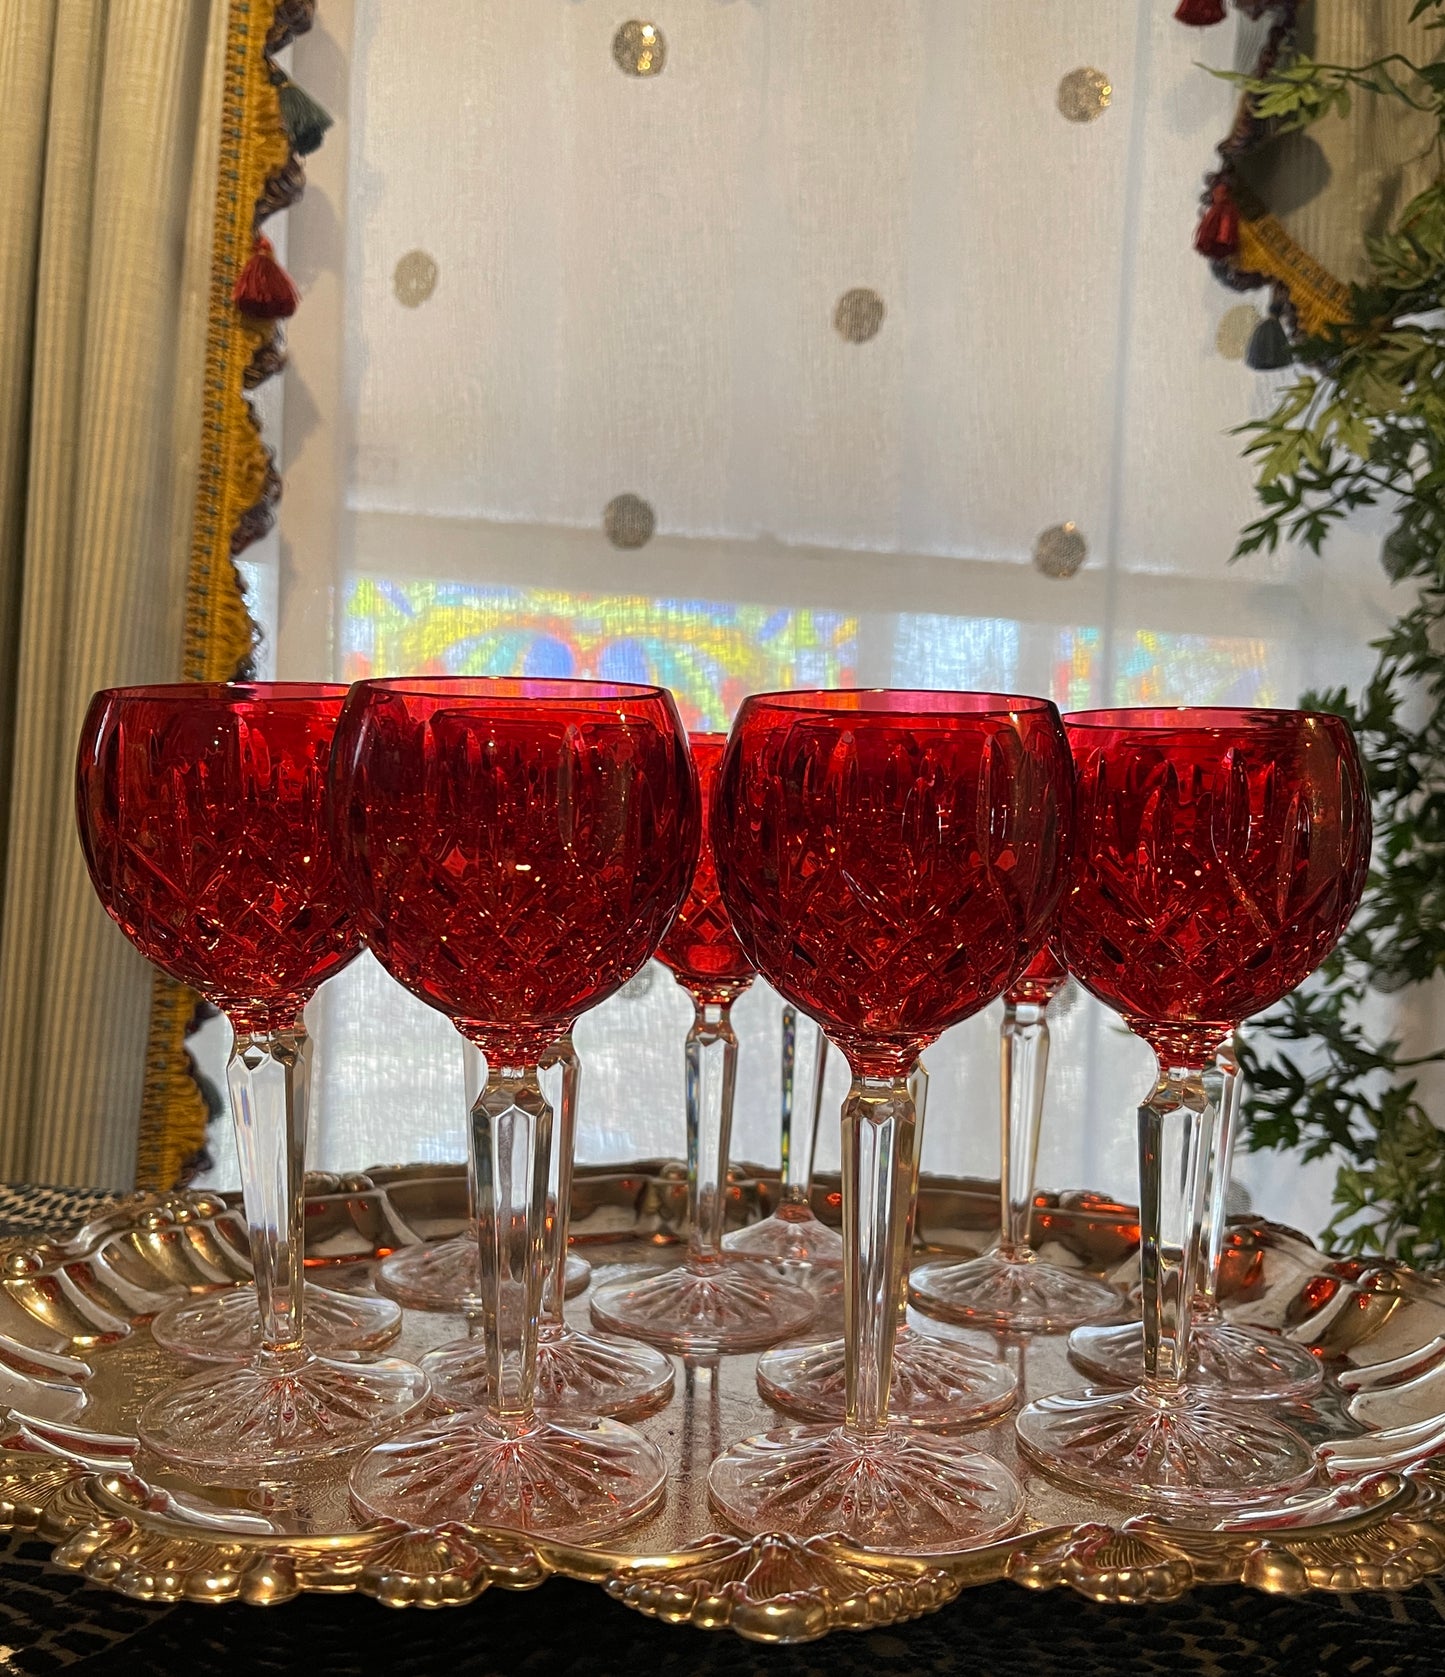 Waterford Lismore Crimson Red Hock Wine Glasses, Sold in Pairs, Pristine